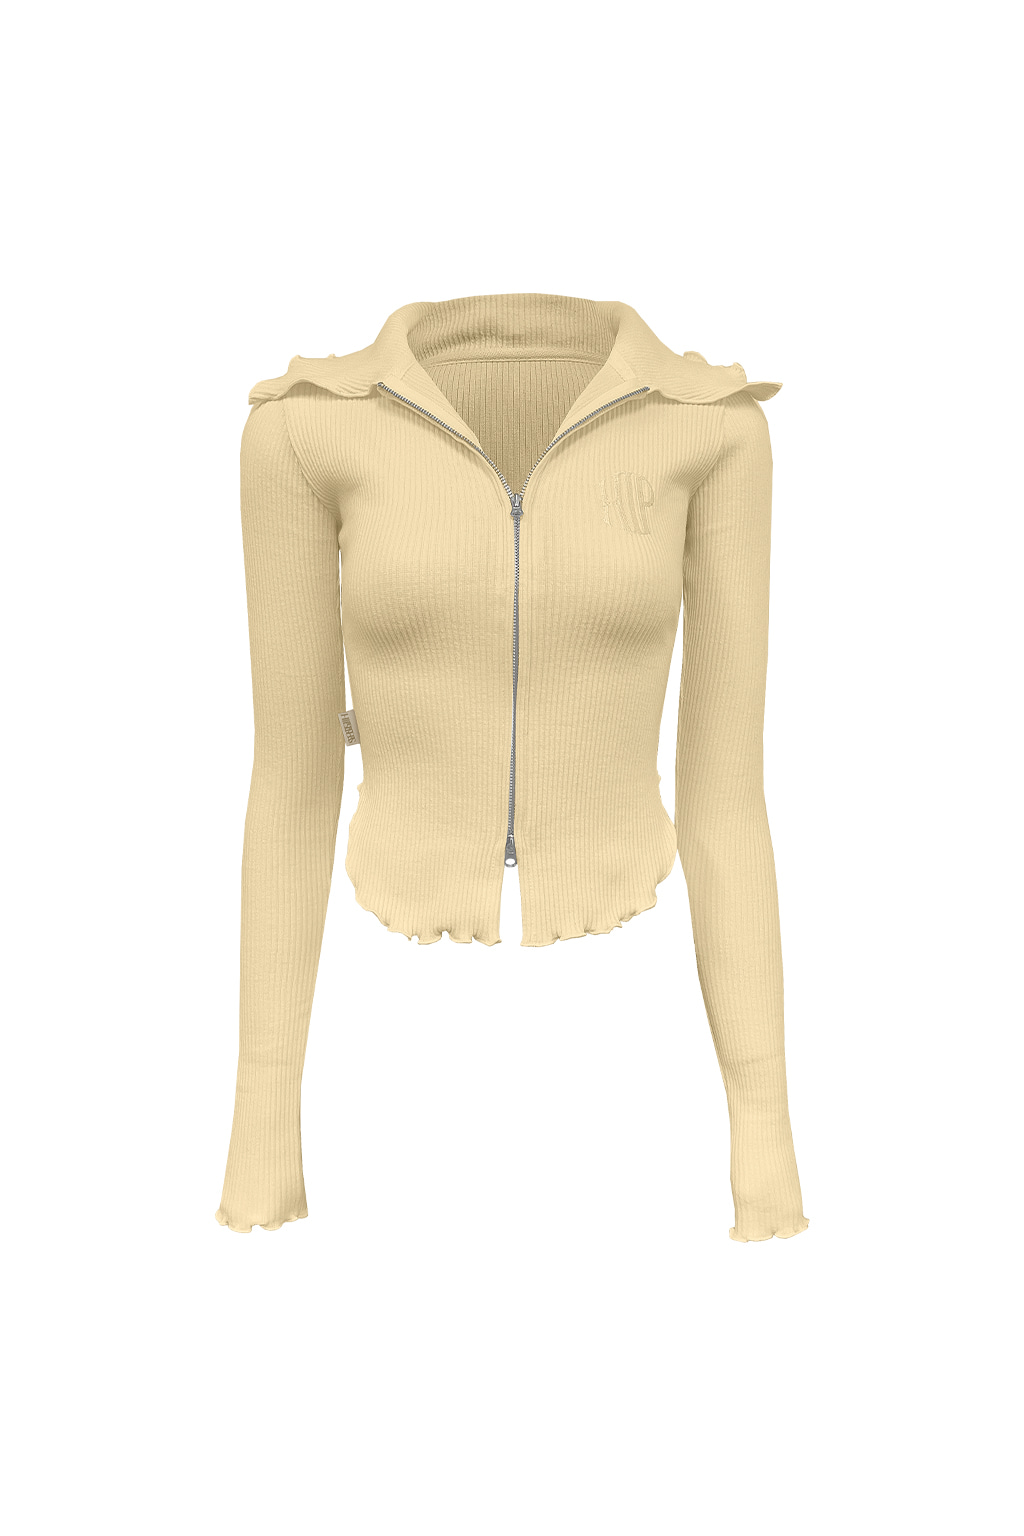 Ribbed Tension Two-Way Glamour Zip-Up Lemon Yellow